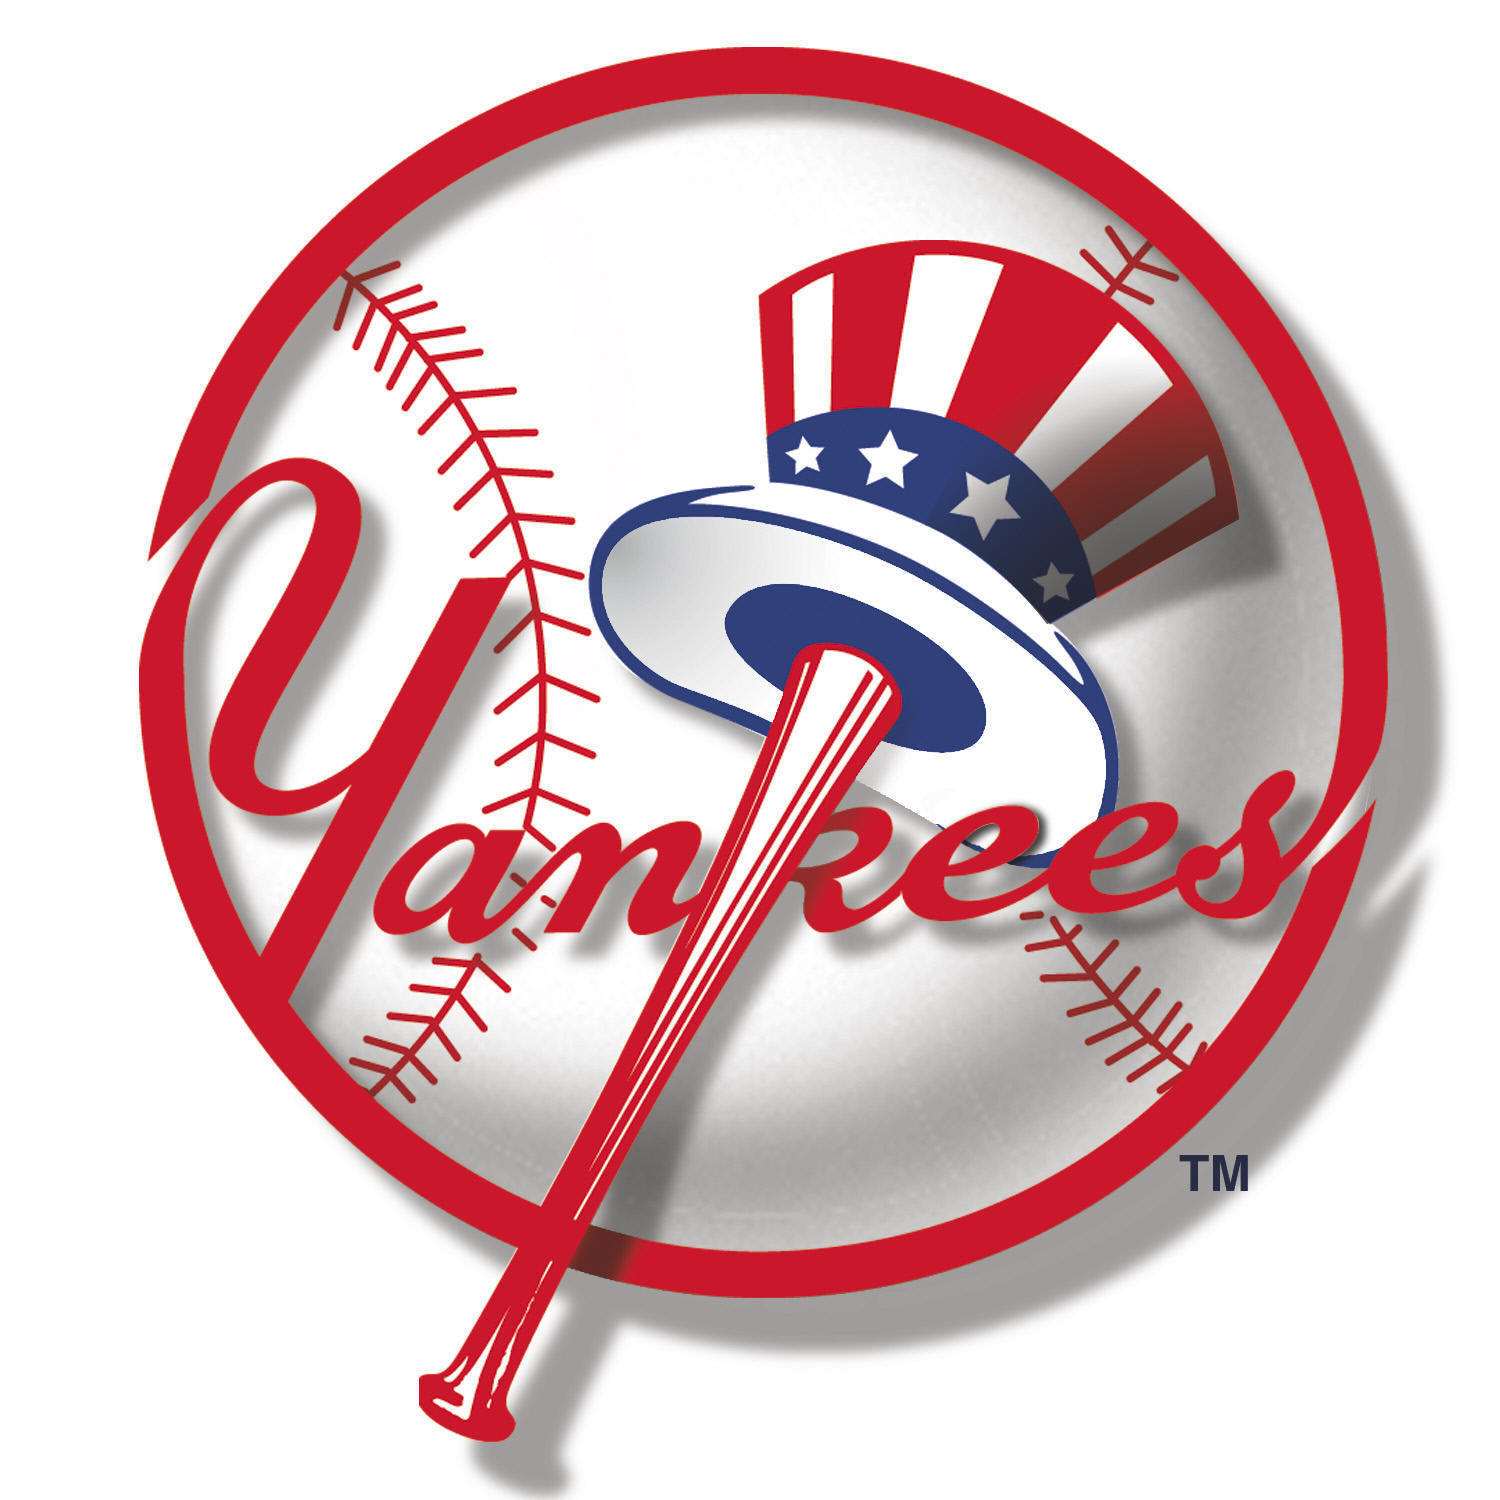 New York Yankees Image Logo HD Wallpaper And Background